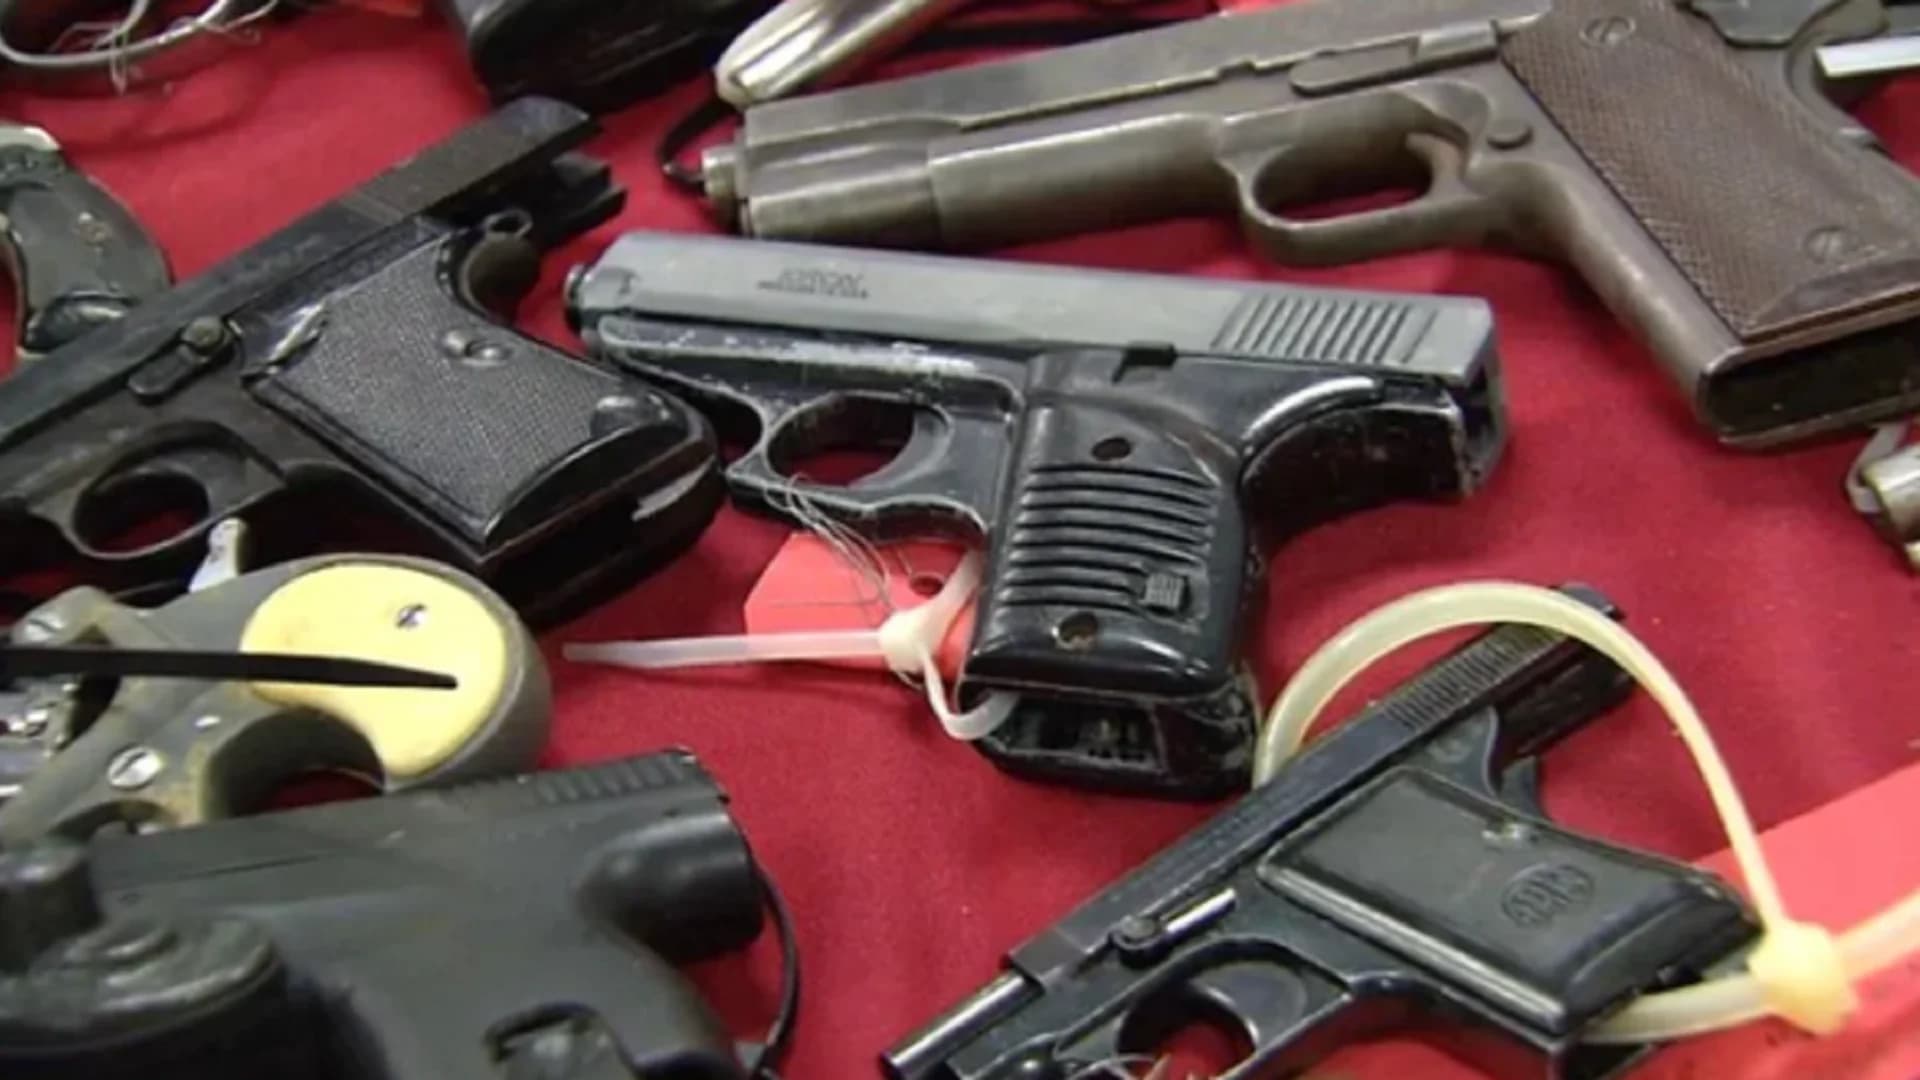 WATCH LIVE: Announcement on investigation into the sale of illegal firearms and parts into NYC